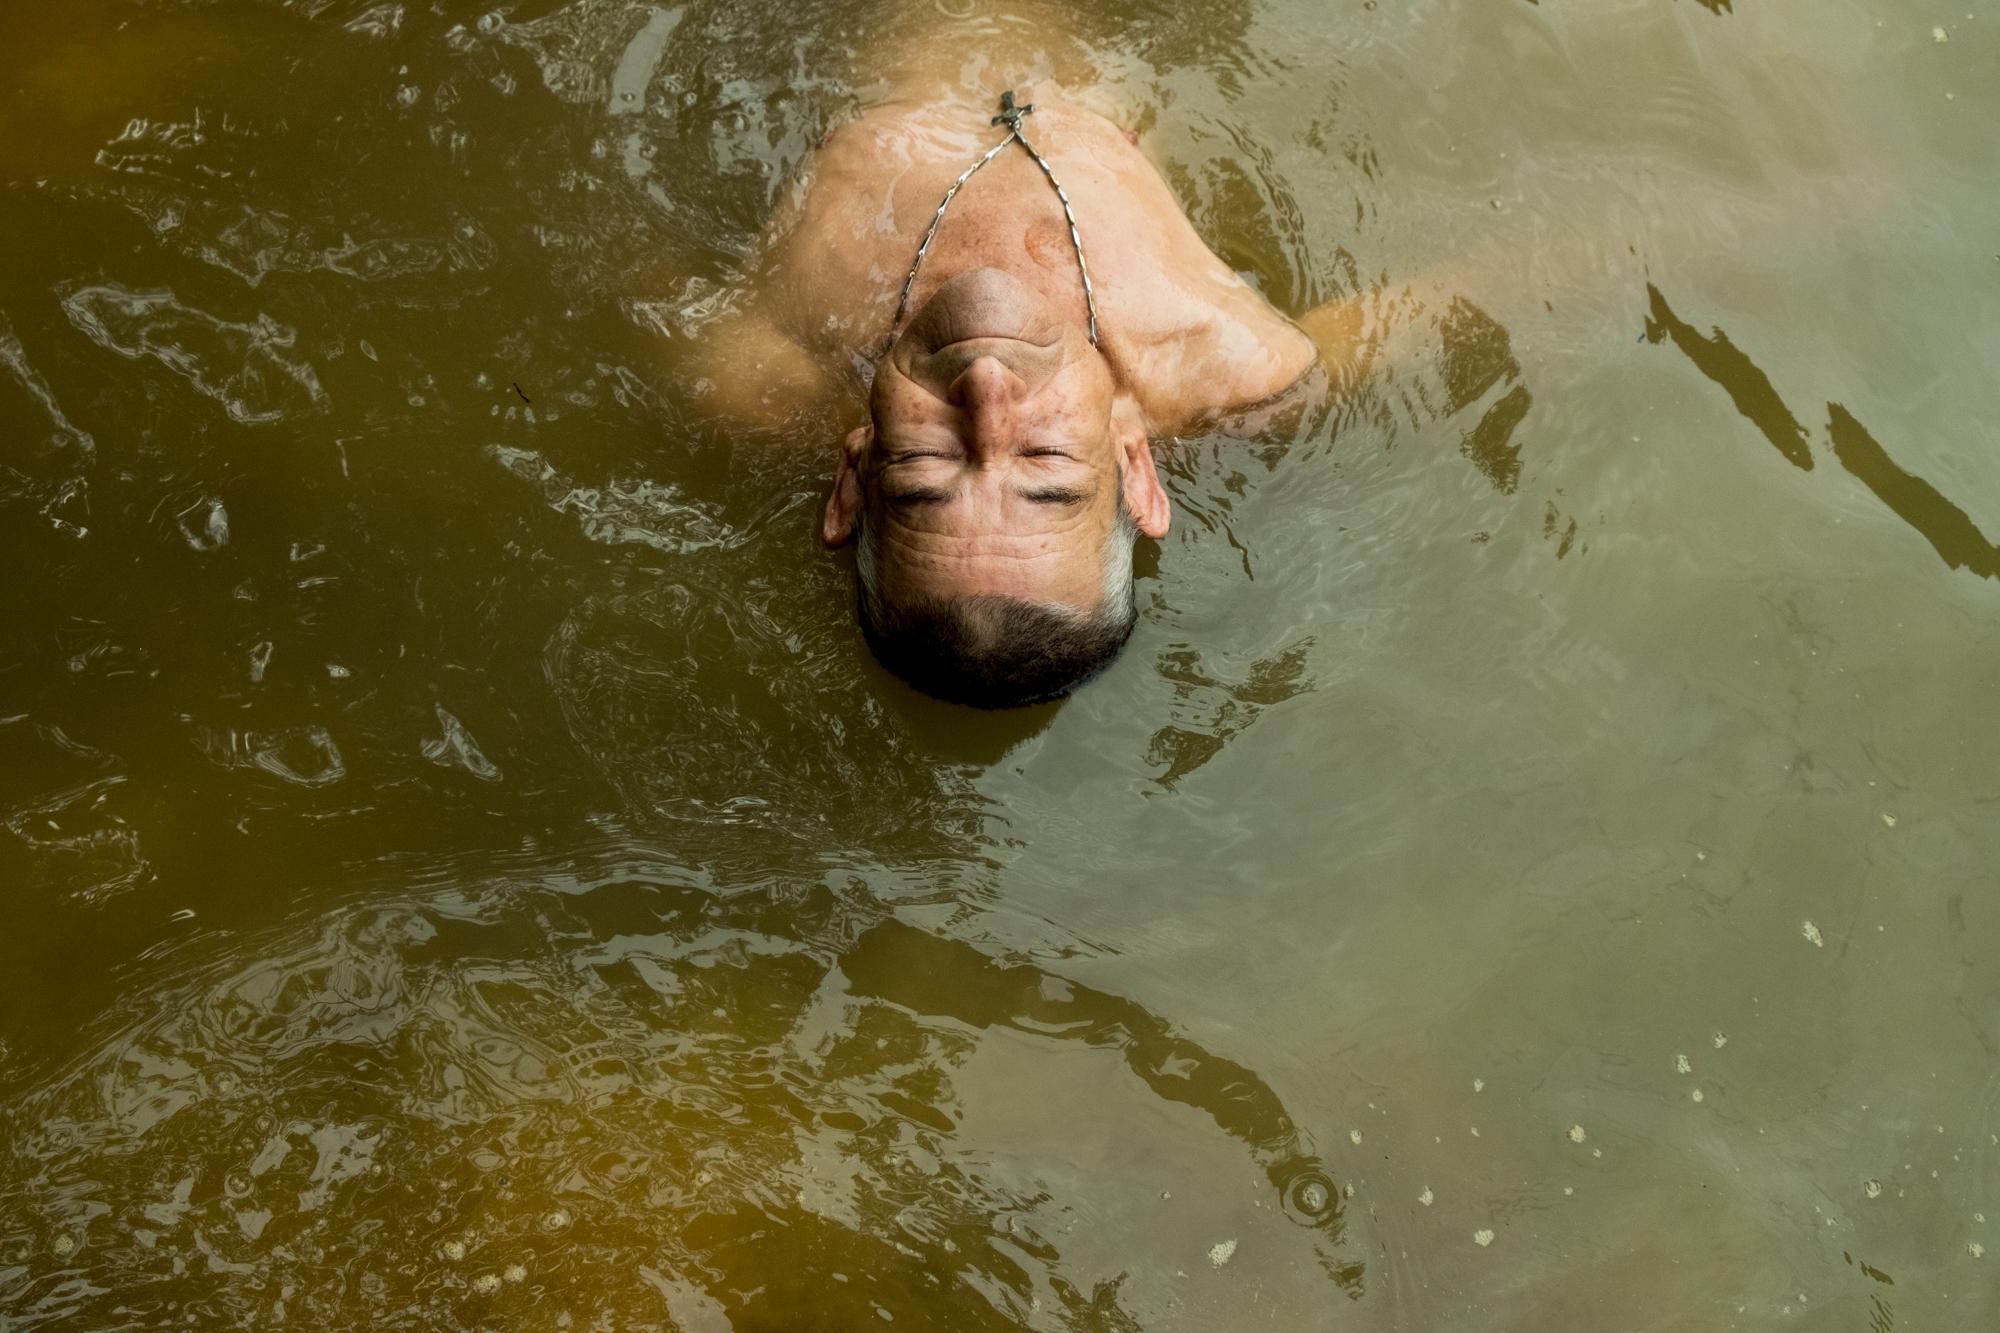 Samaná: the last free river - At 78, Manuel Botero works several days a week in...